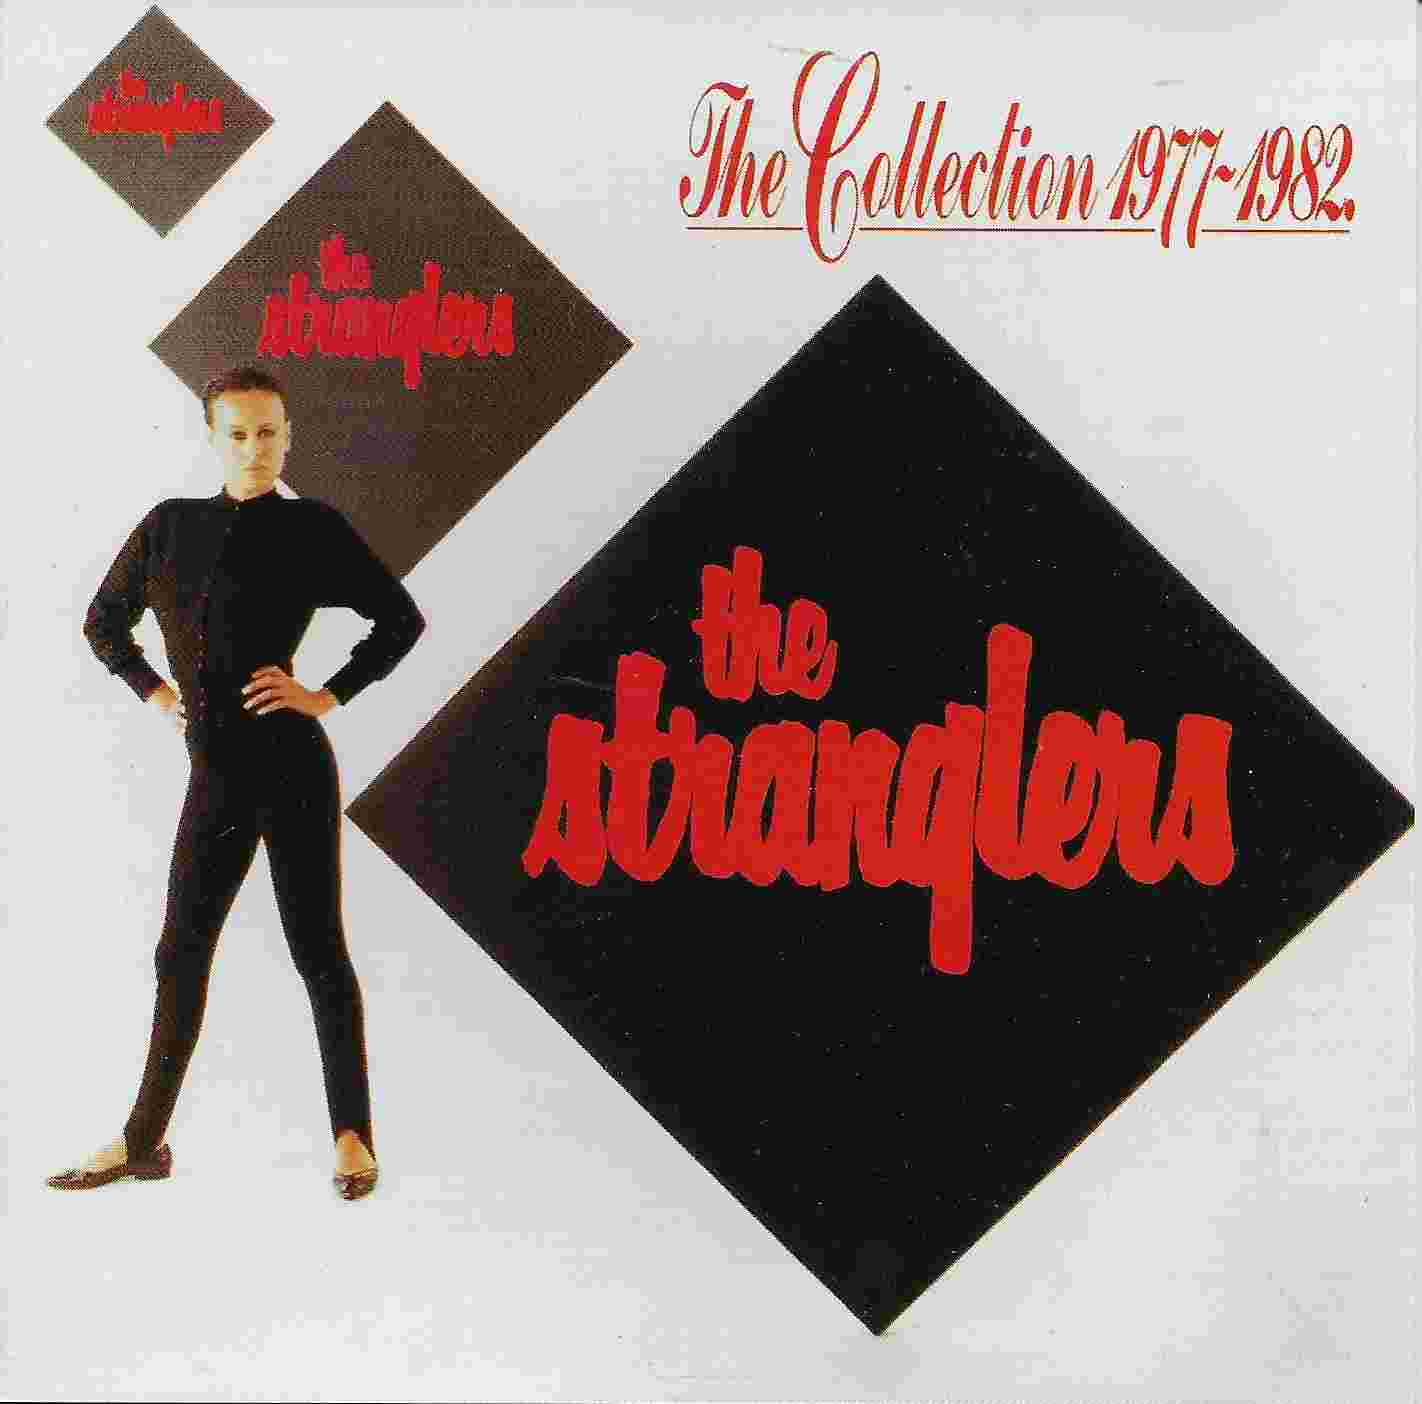 Picture of CDP 746066-2 The collection 1977 - 1982 by artist The Stranglers from The Stranglers cds